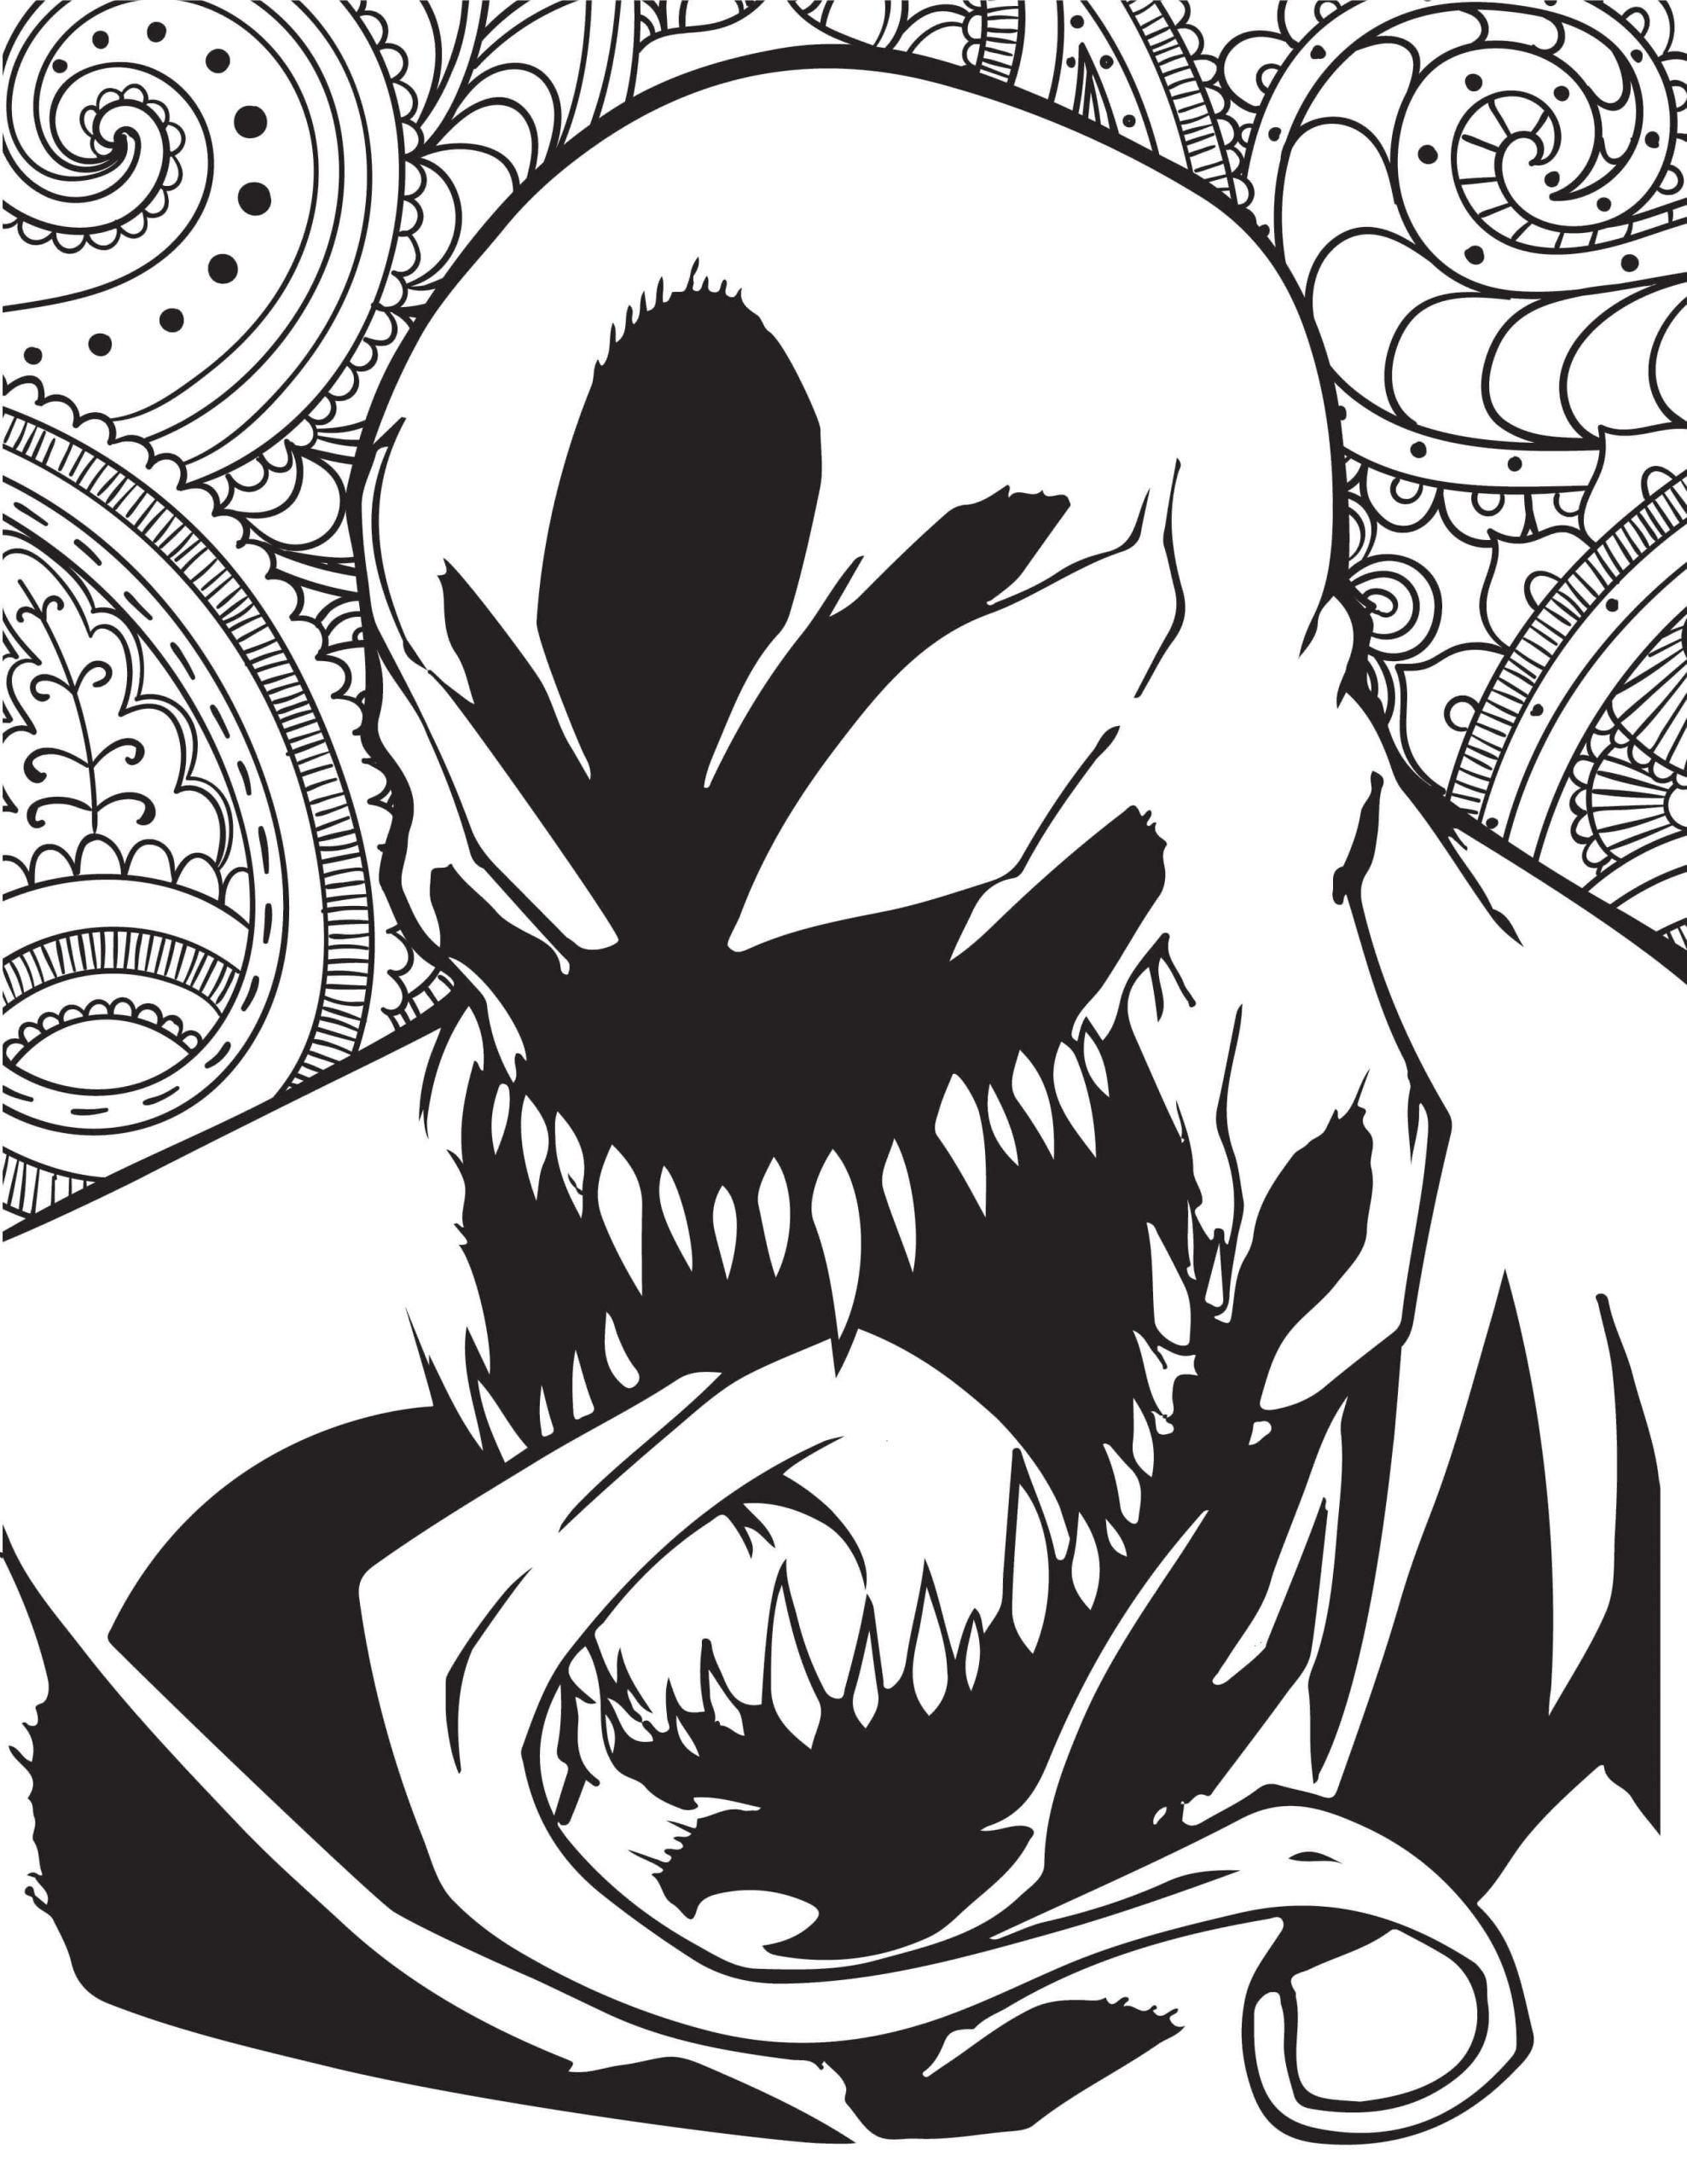 Marvel Printable Coloring Pages
 Marvel Villain Coloring Pages